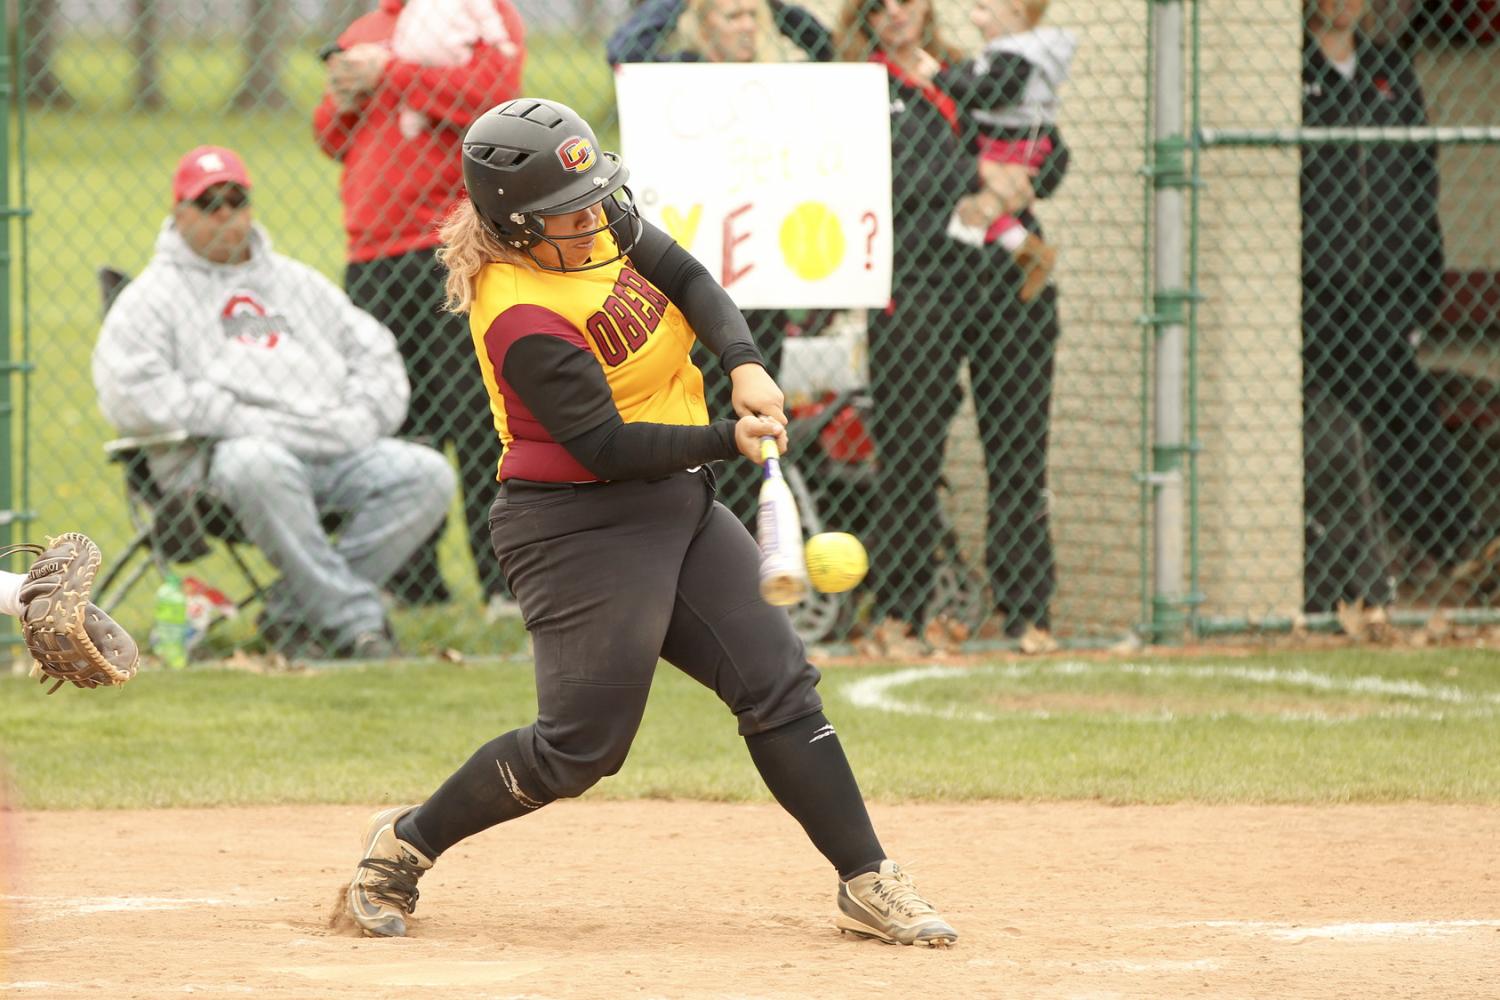 Senior captain Grace Evans connects with a pitch against Wittenberg University on Senior Day last Saturday. The Yeowomen finished their season 12–28 overall and 2–14 in the NCAC.